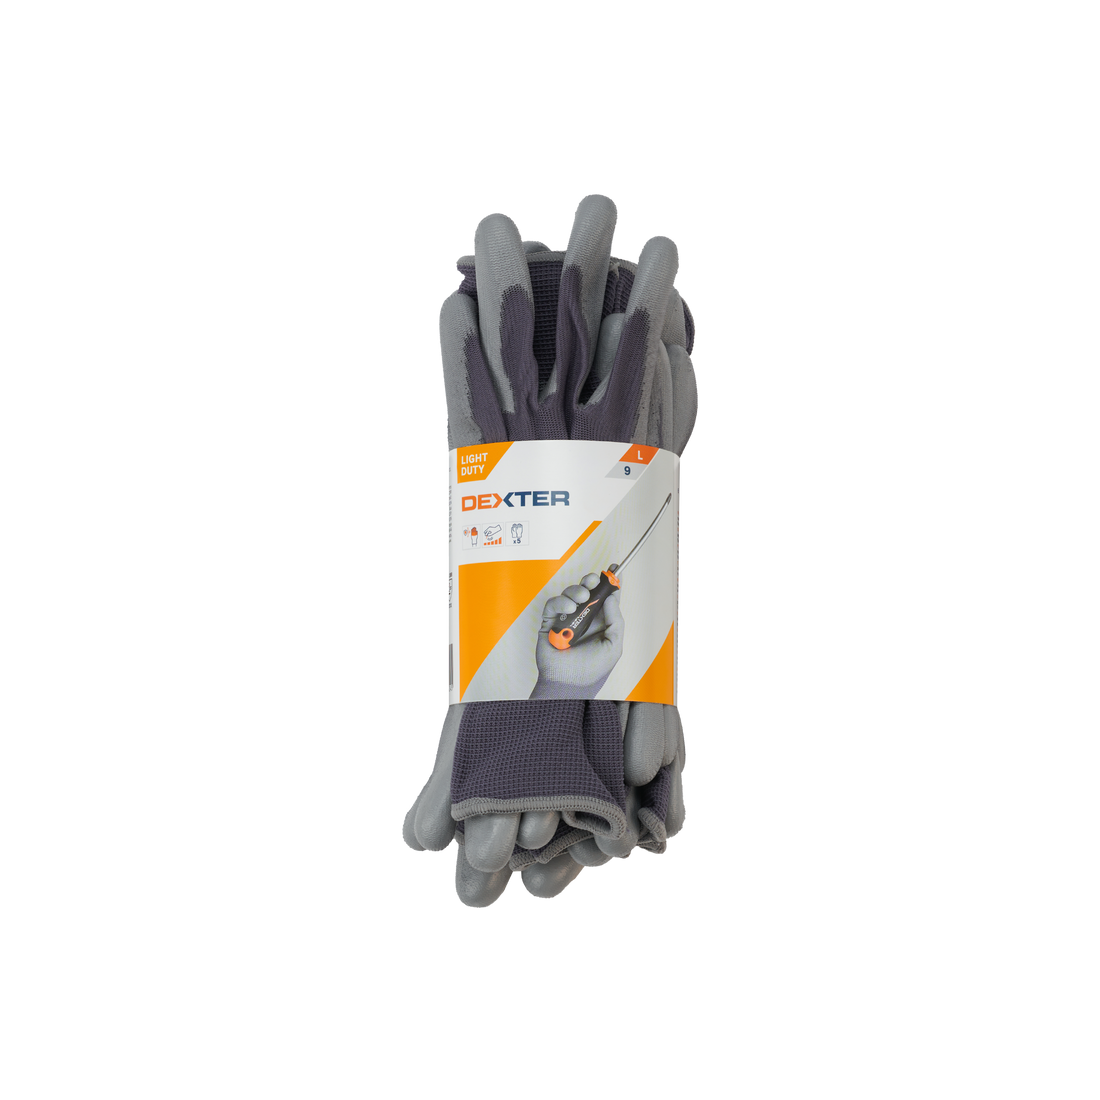 DEXTER PRECISION NYLON AND COATED PALM GLOVES SIZE 9L 5 PAIRS